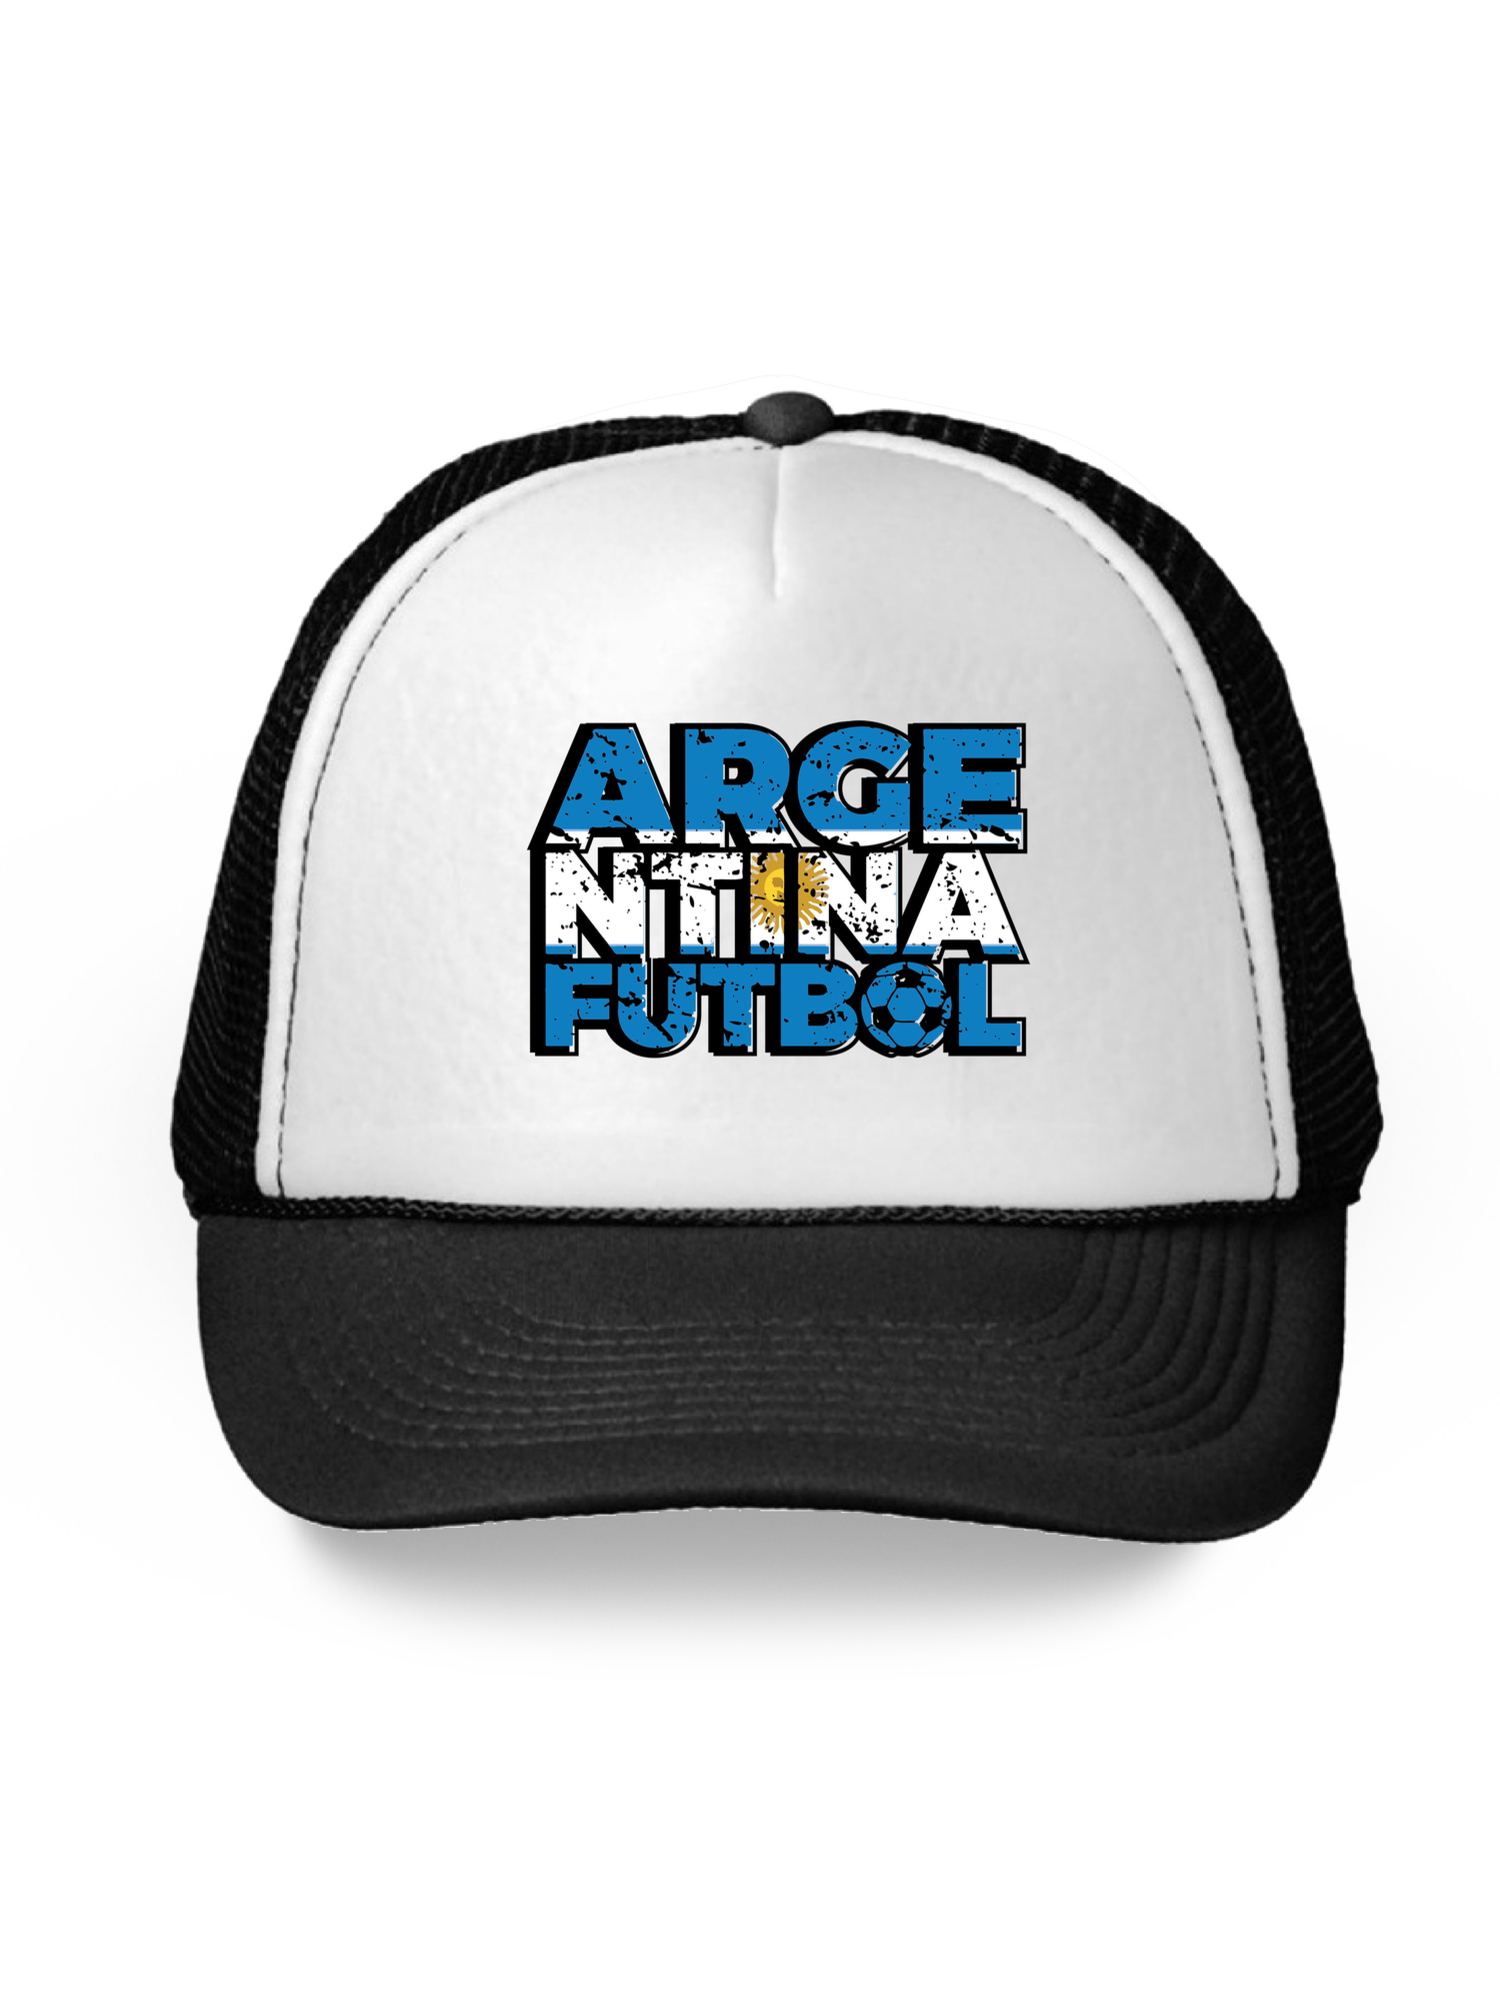 Awkward Styles Argentina Futbol Hat Argentina Trucker Hats for Men and Women Hat Gifts from Argentina Argentinian Soccer Cap Argentinian Hats Unisex Argentina Snapback Hat Argentina 2018 Trucker Hats - image 1 of 6